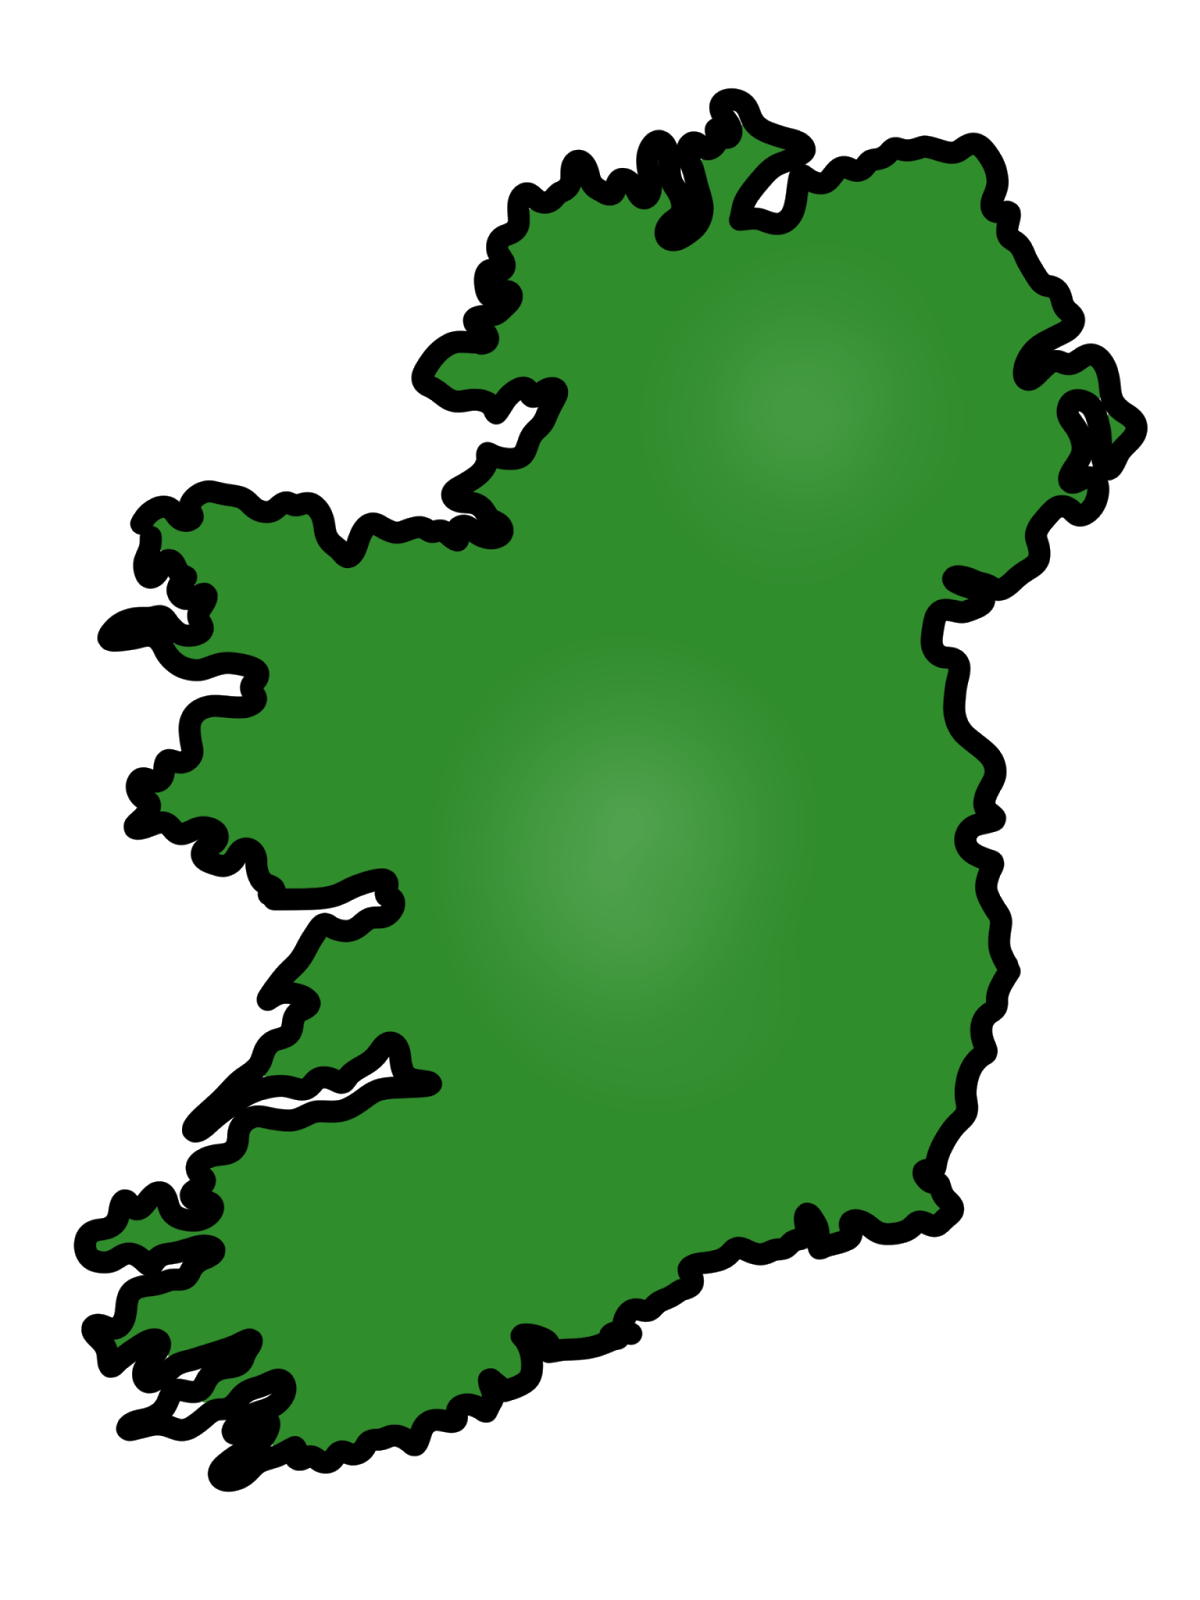 Simple Irish Map Free Cliparts That You Can Download To You Computer